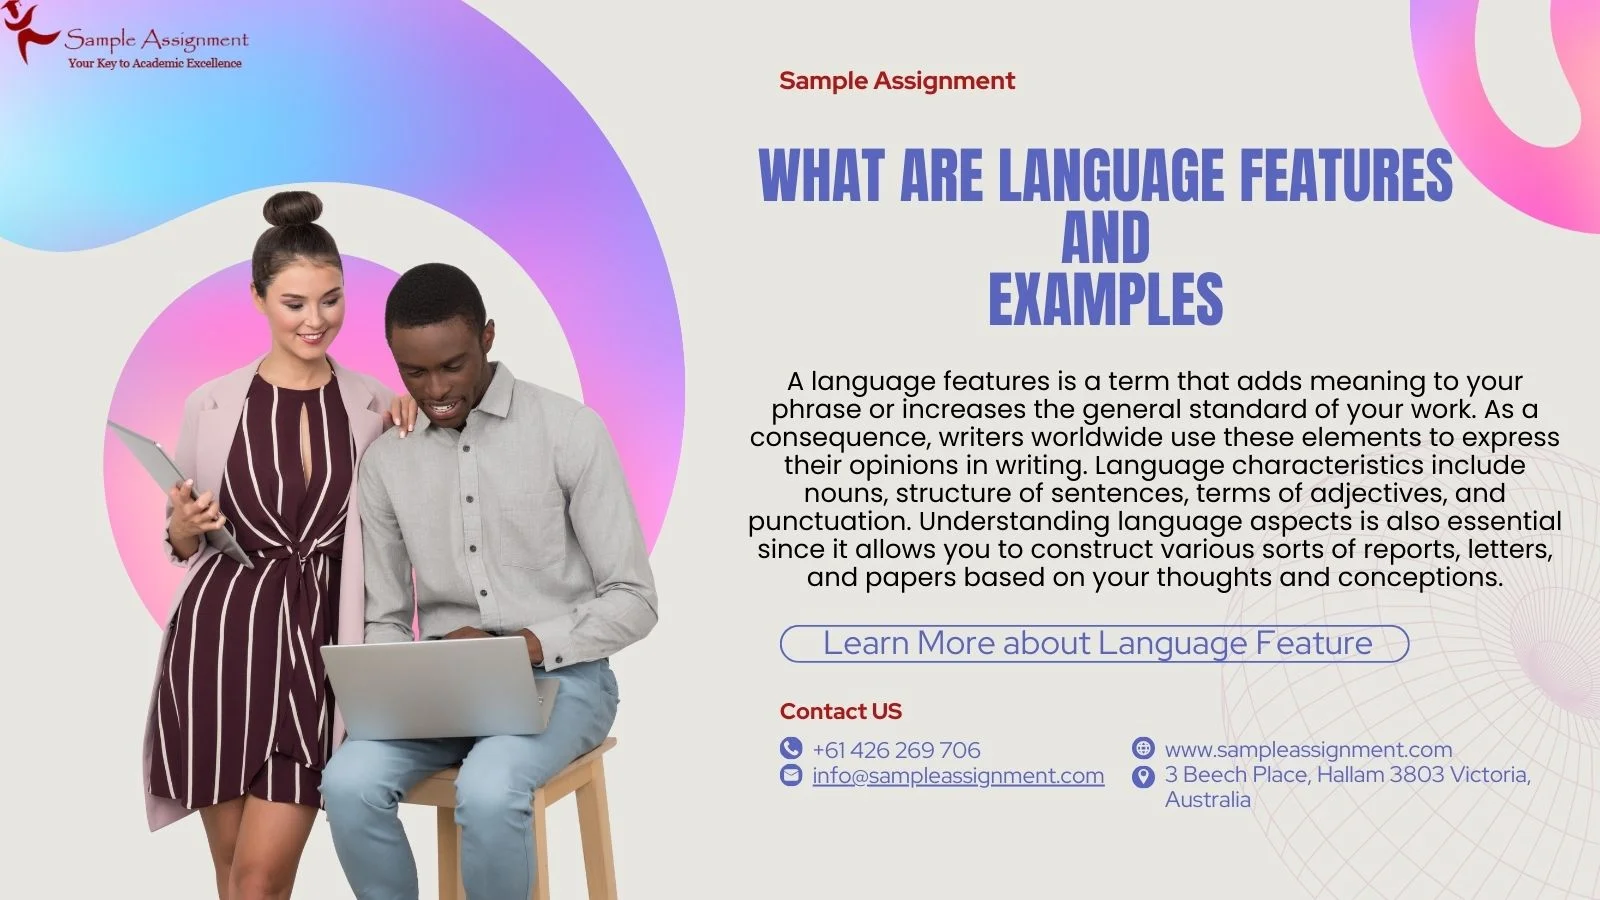 What are Language Features And How To Use Them?